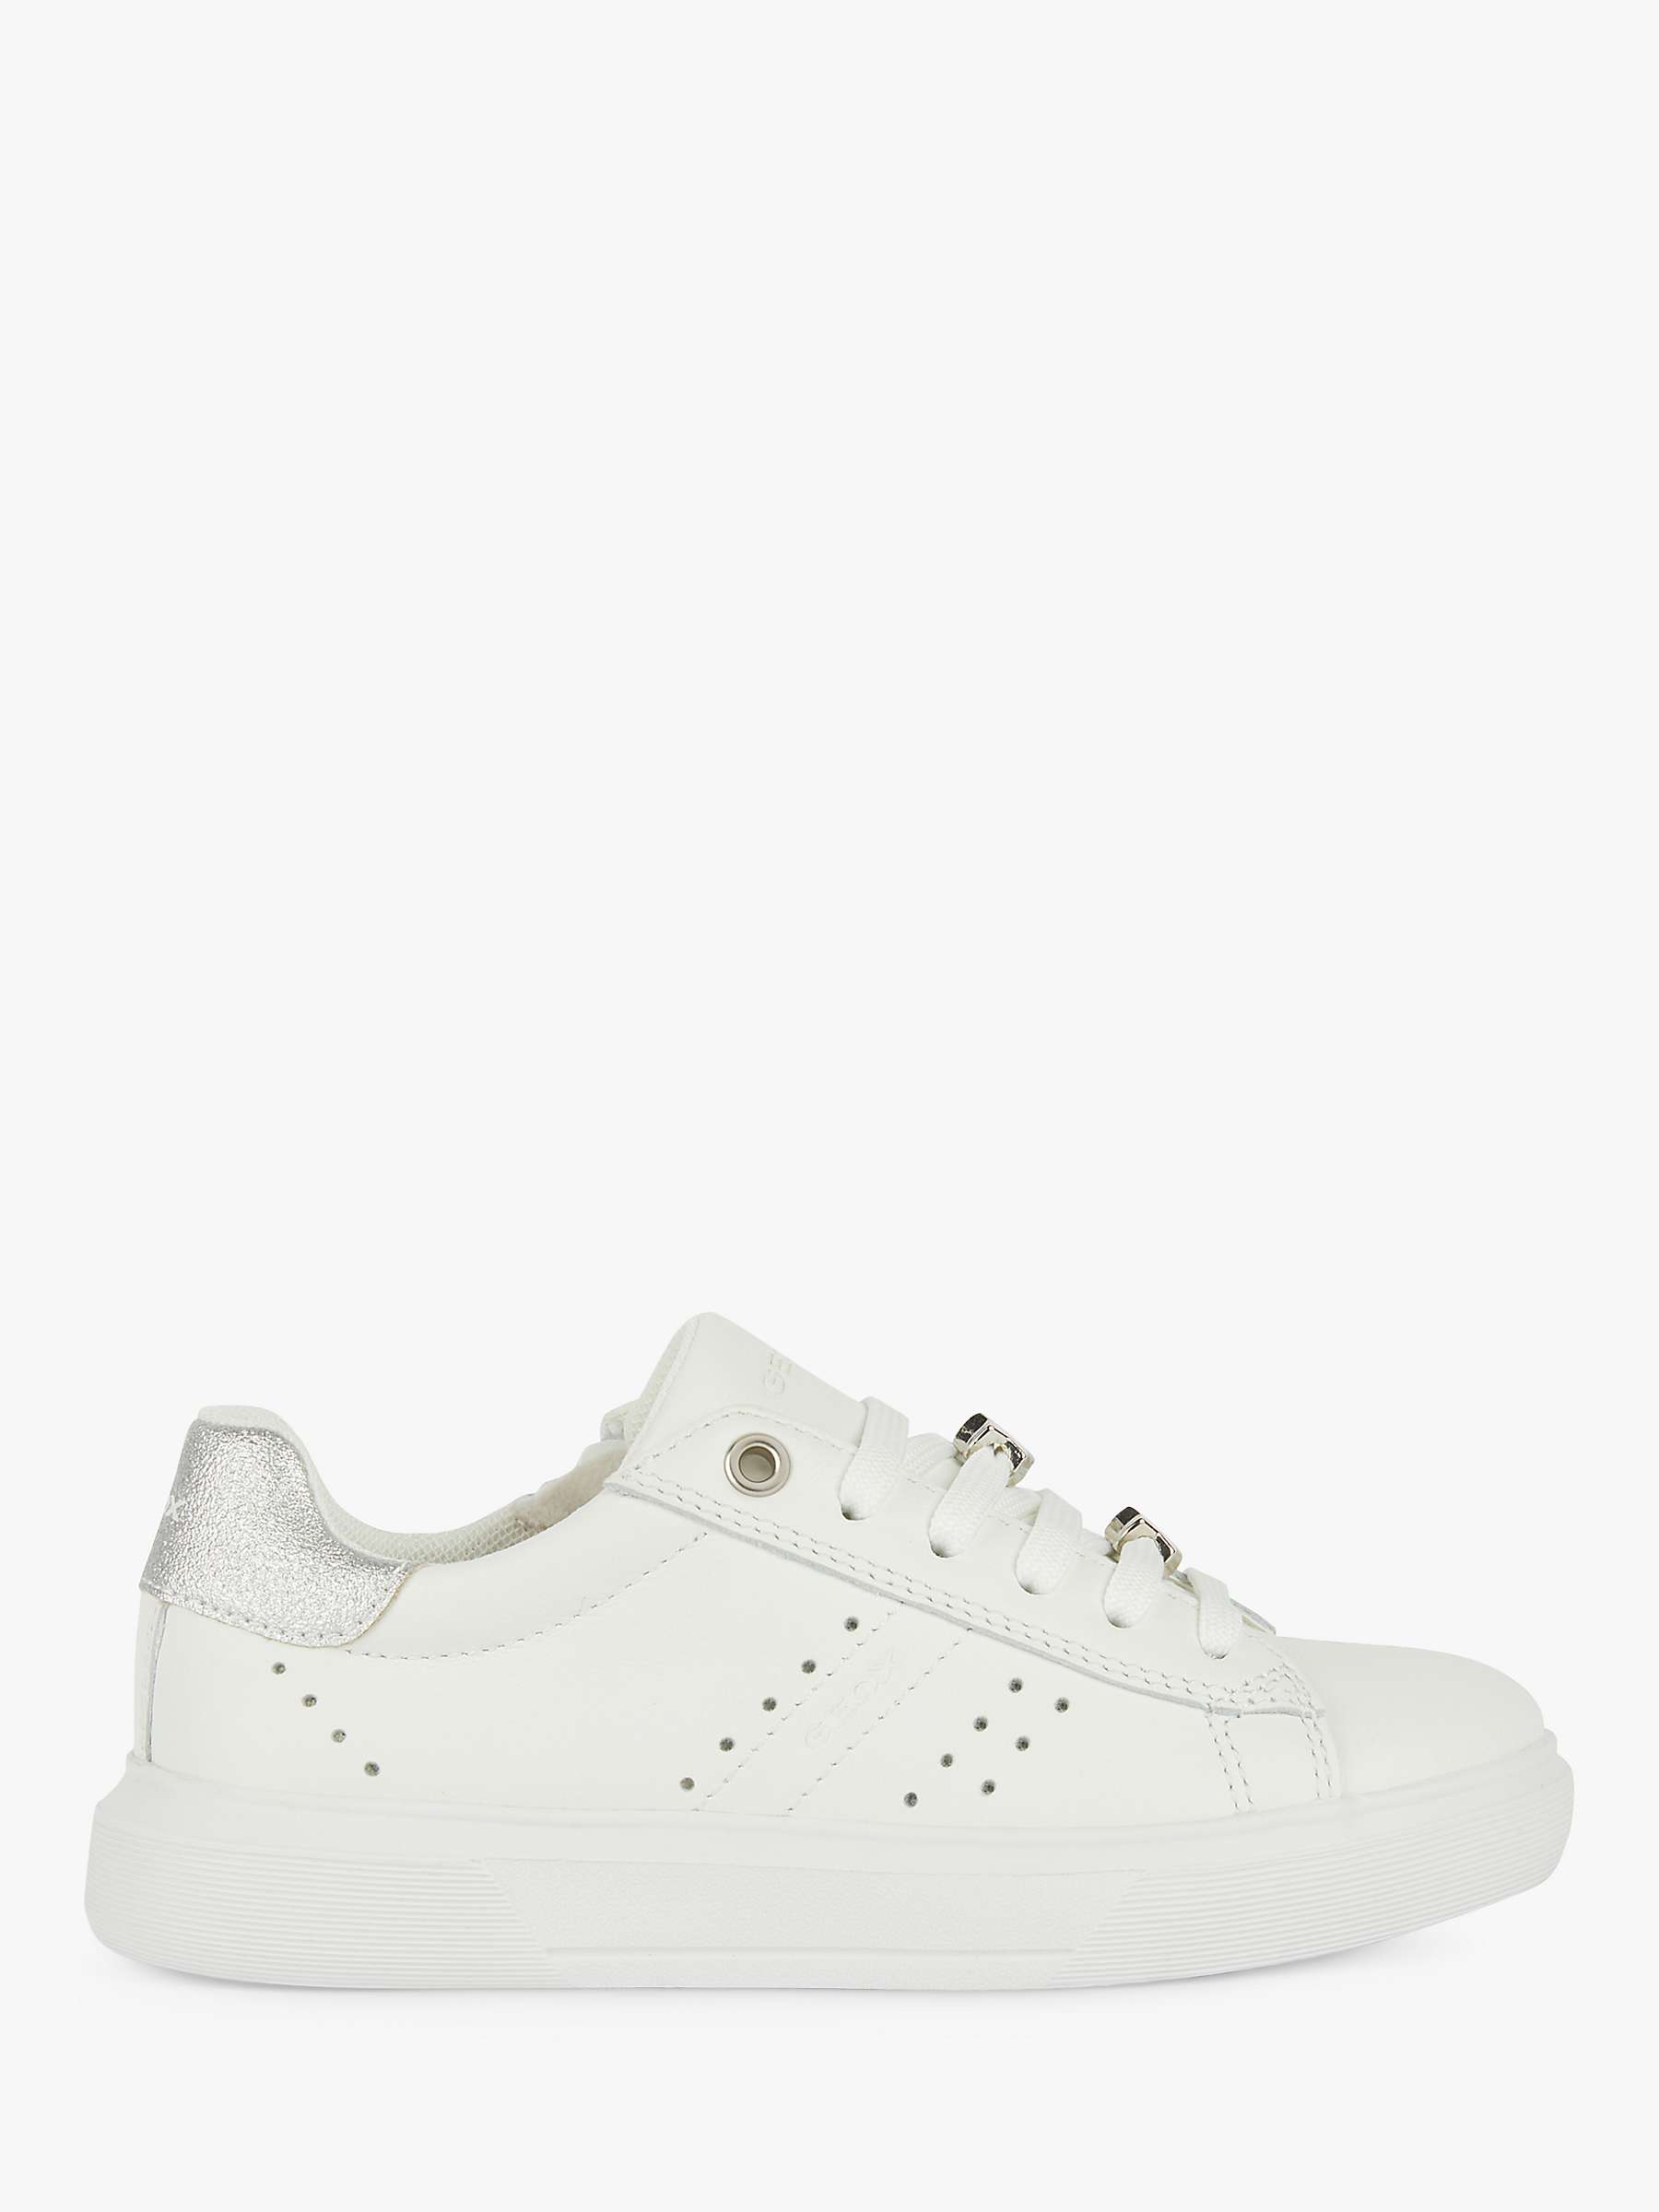 Buy Geox Kids' J Nettuno Low Cut Lace Up Trainers, White/Silver Online at johnlewis.com